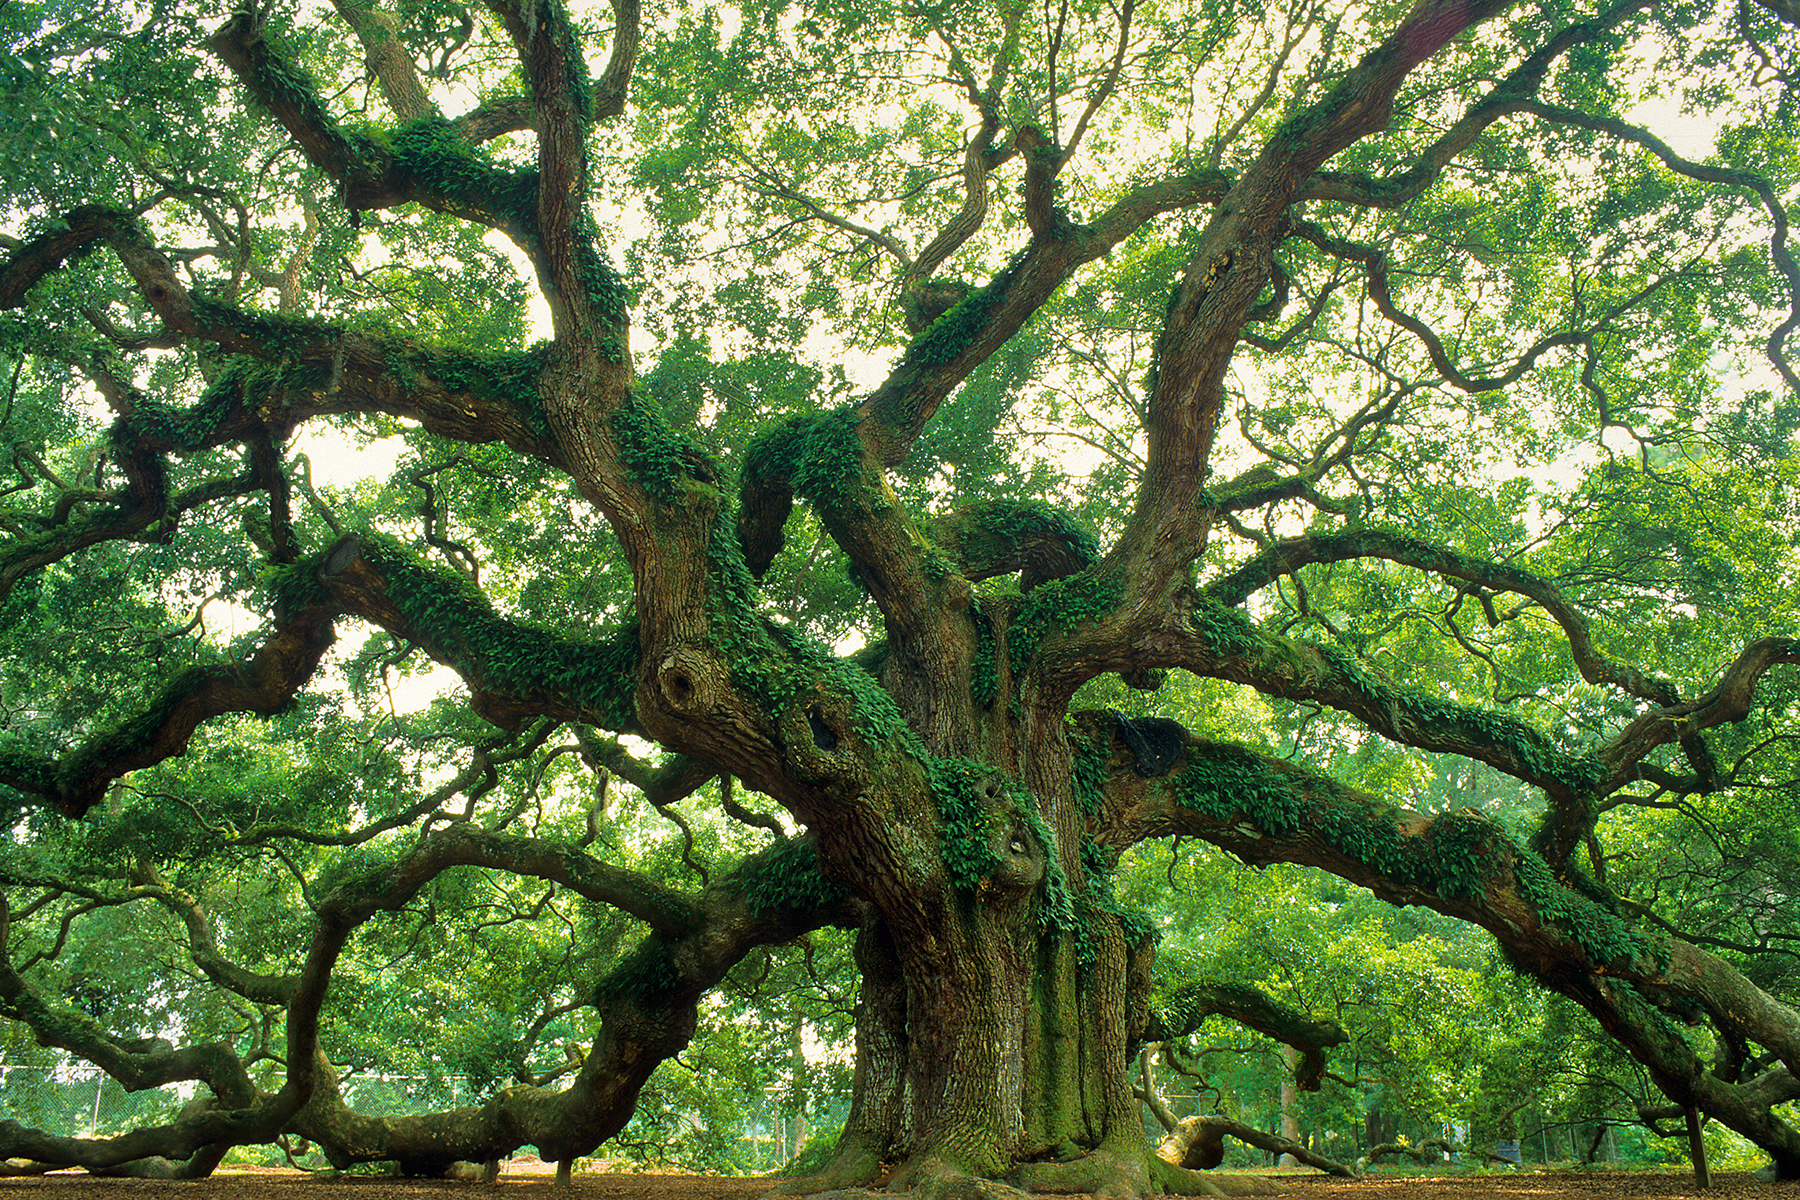 Angel Oak Tree, one of the most famous sea islands attractions